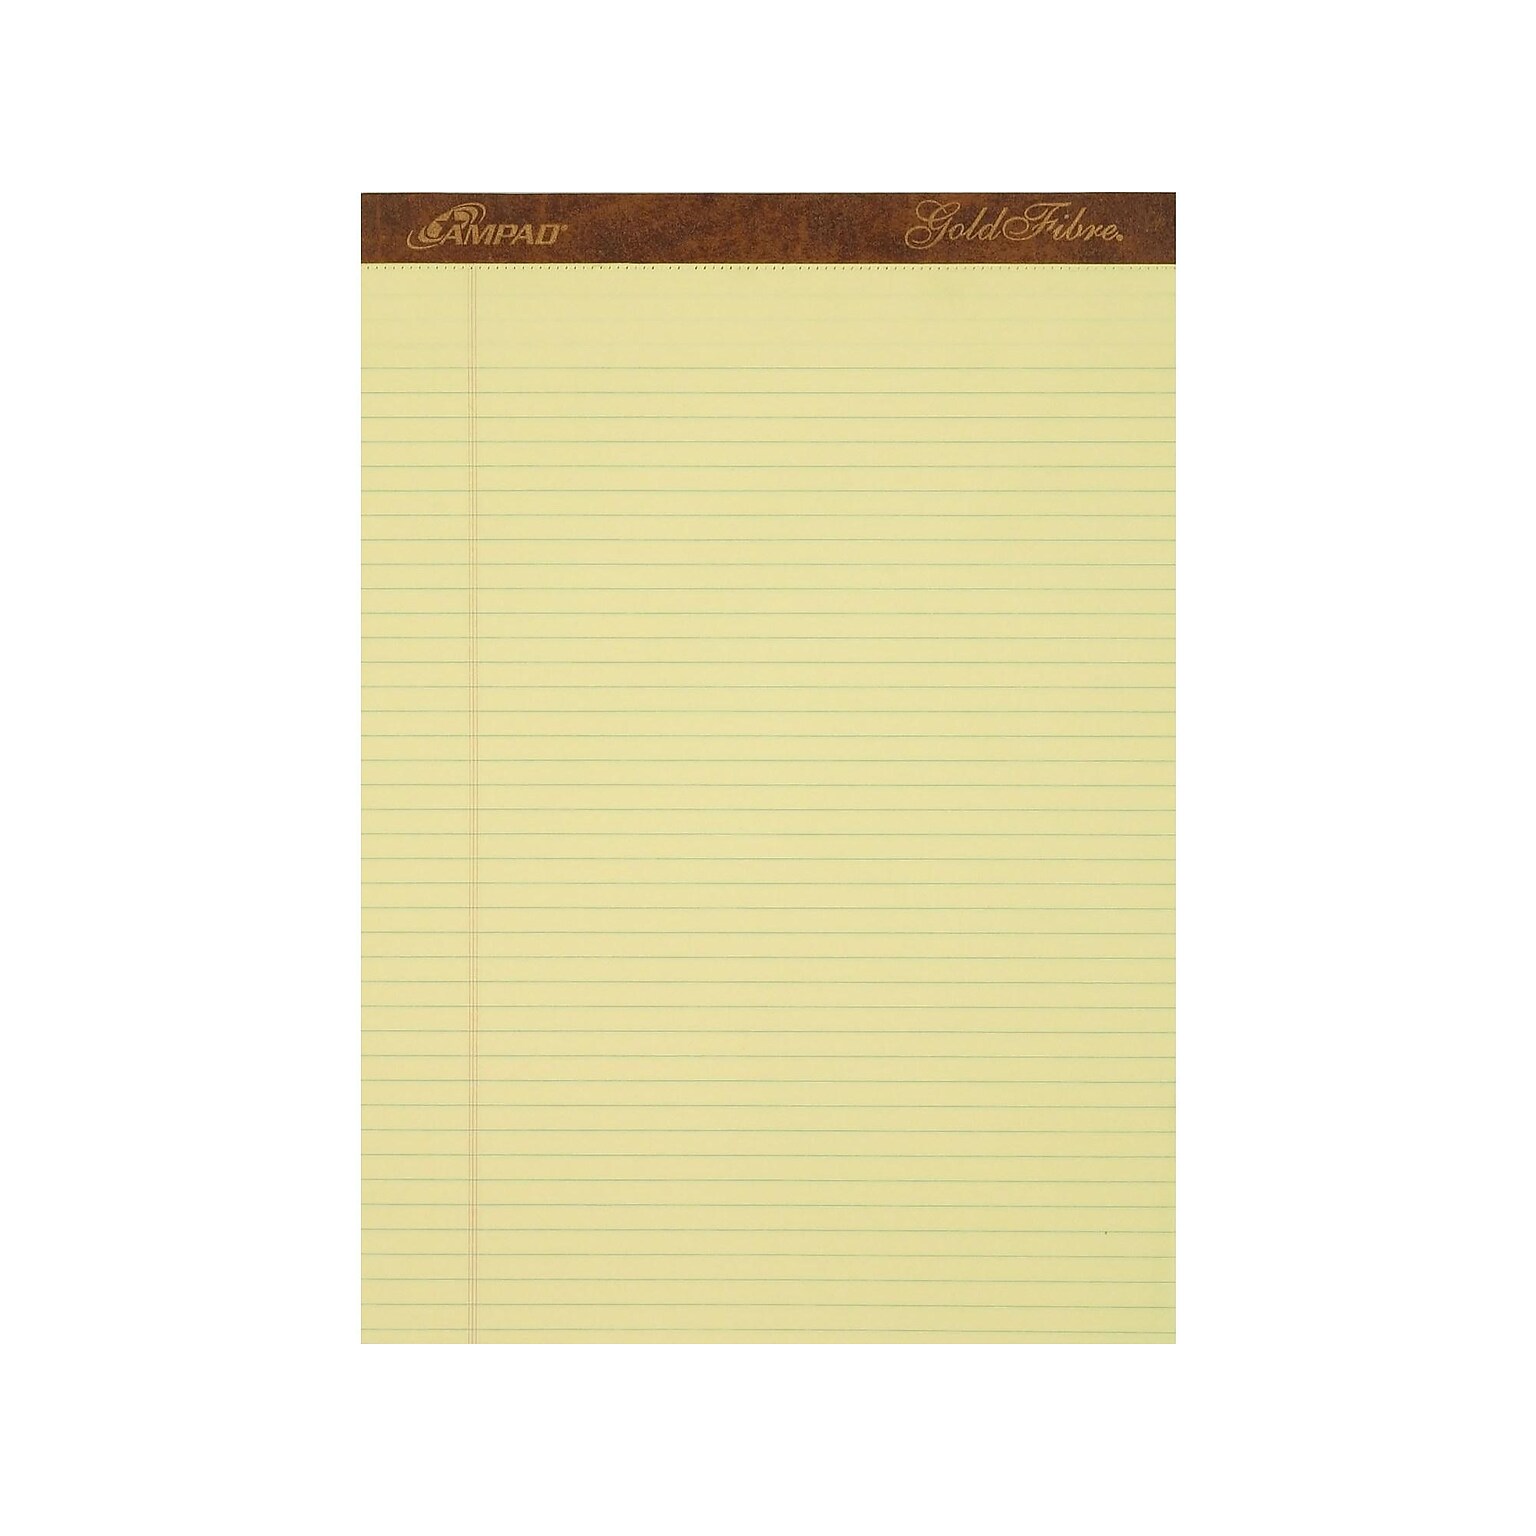 Ampad Gold Fibre Notepads, 8.5 x 11.75, Narrow Ruled, Canary, 50 Sheets/Pad, 12 Pads/Pack (TOP 20-022)